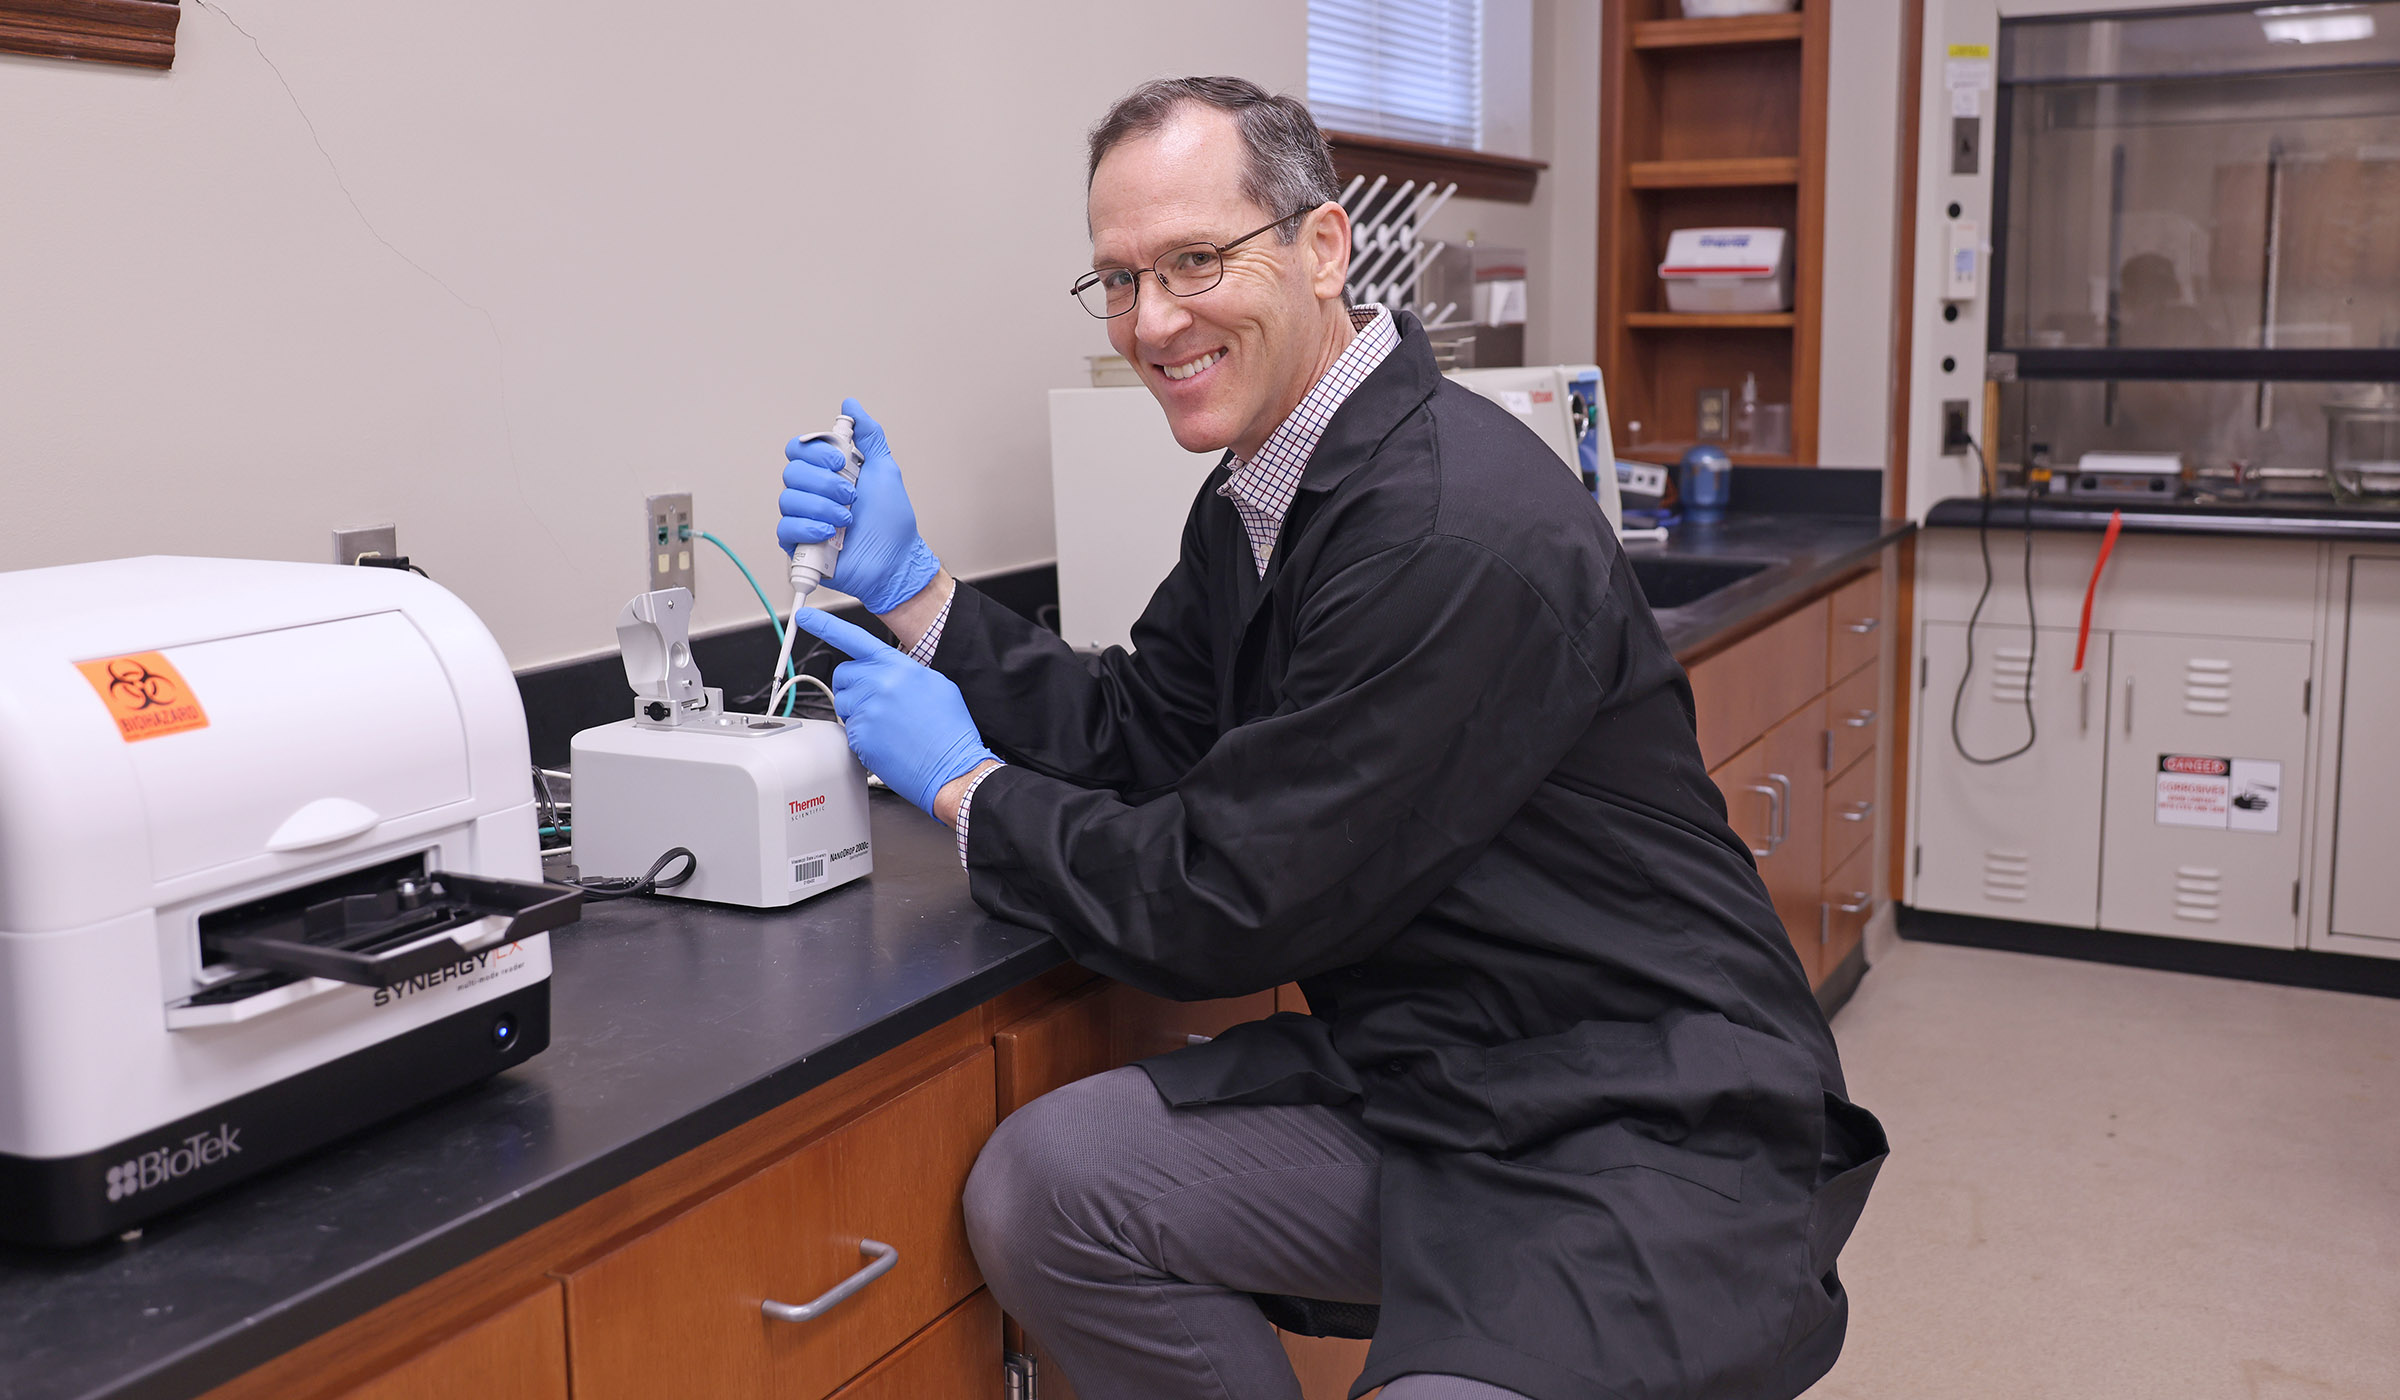 Steven Elder, pictured in a research lab